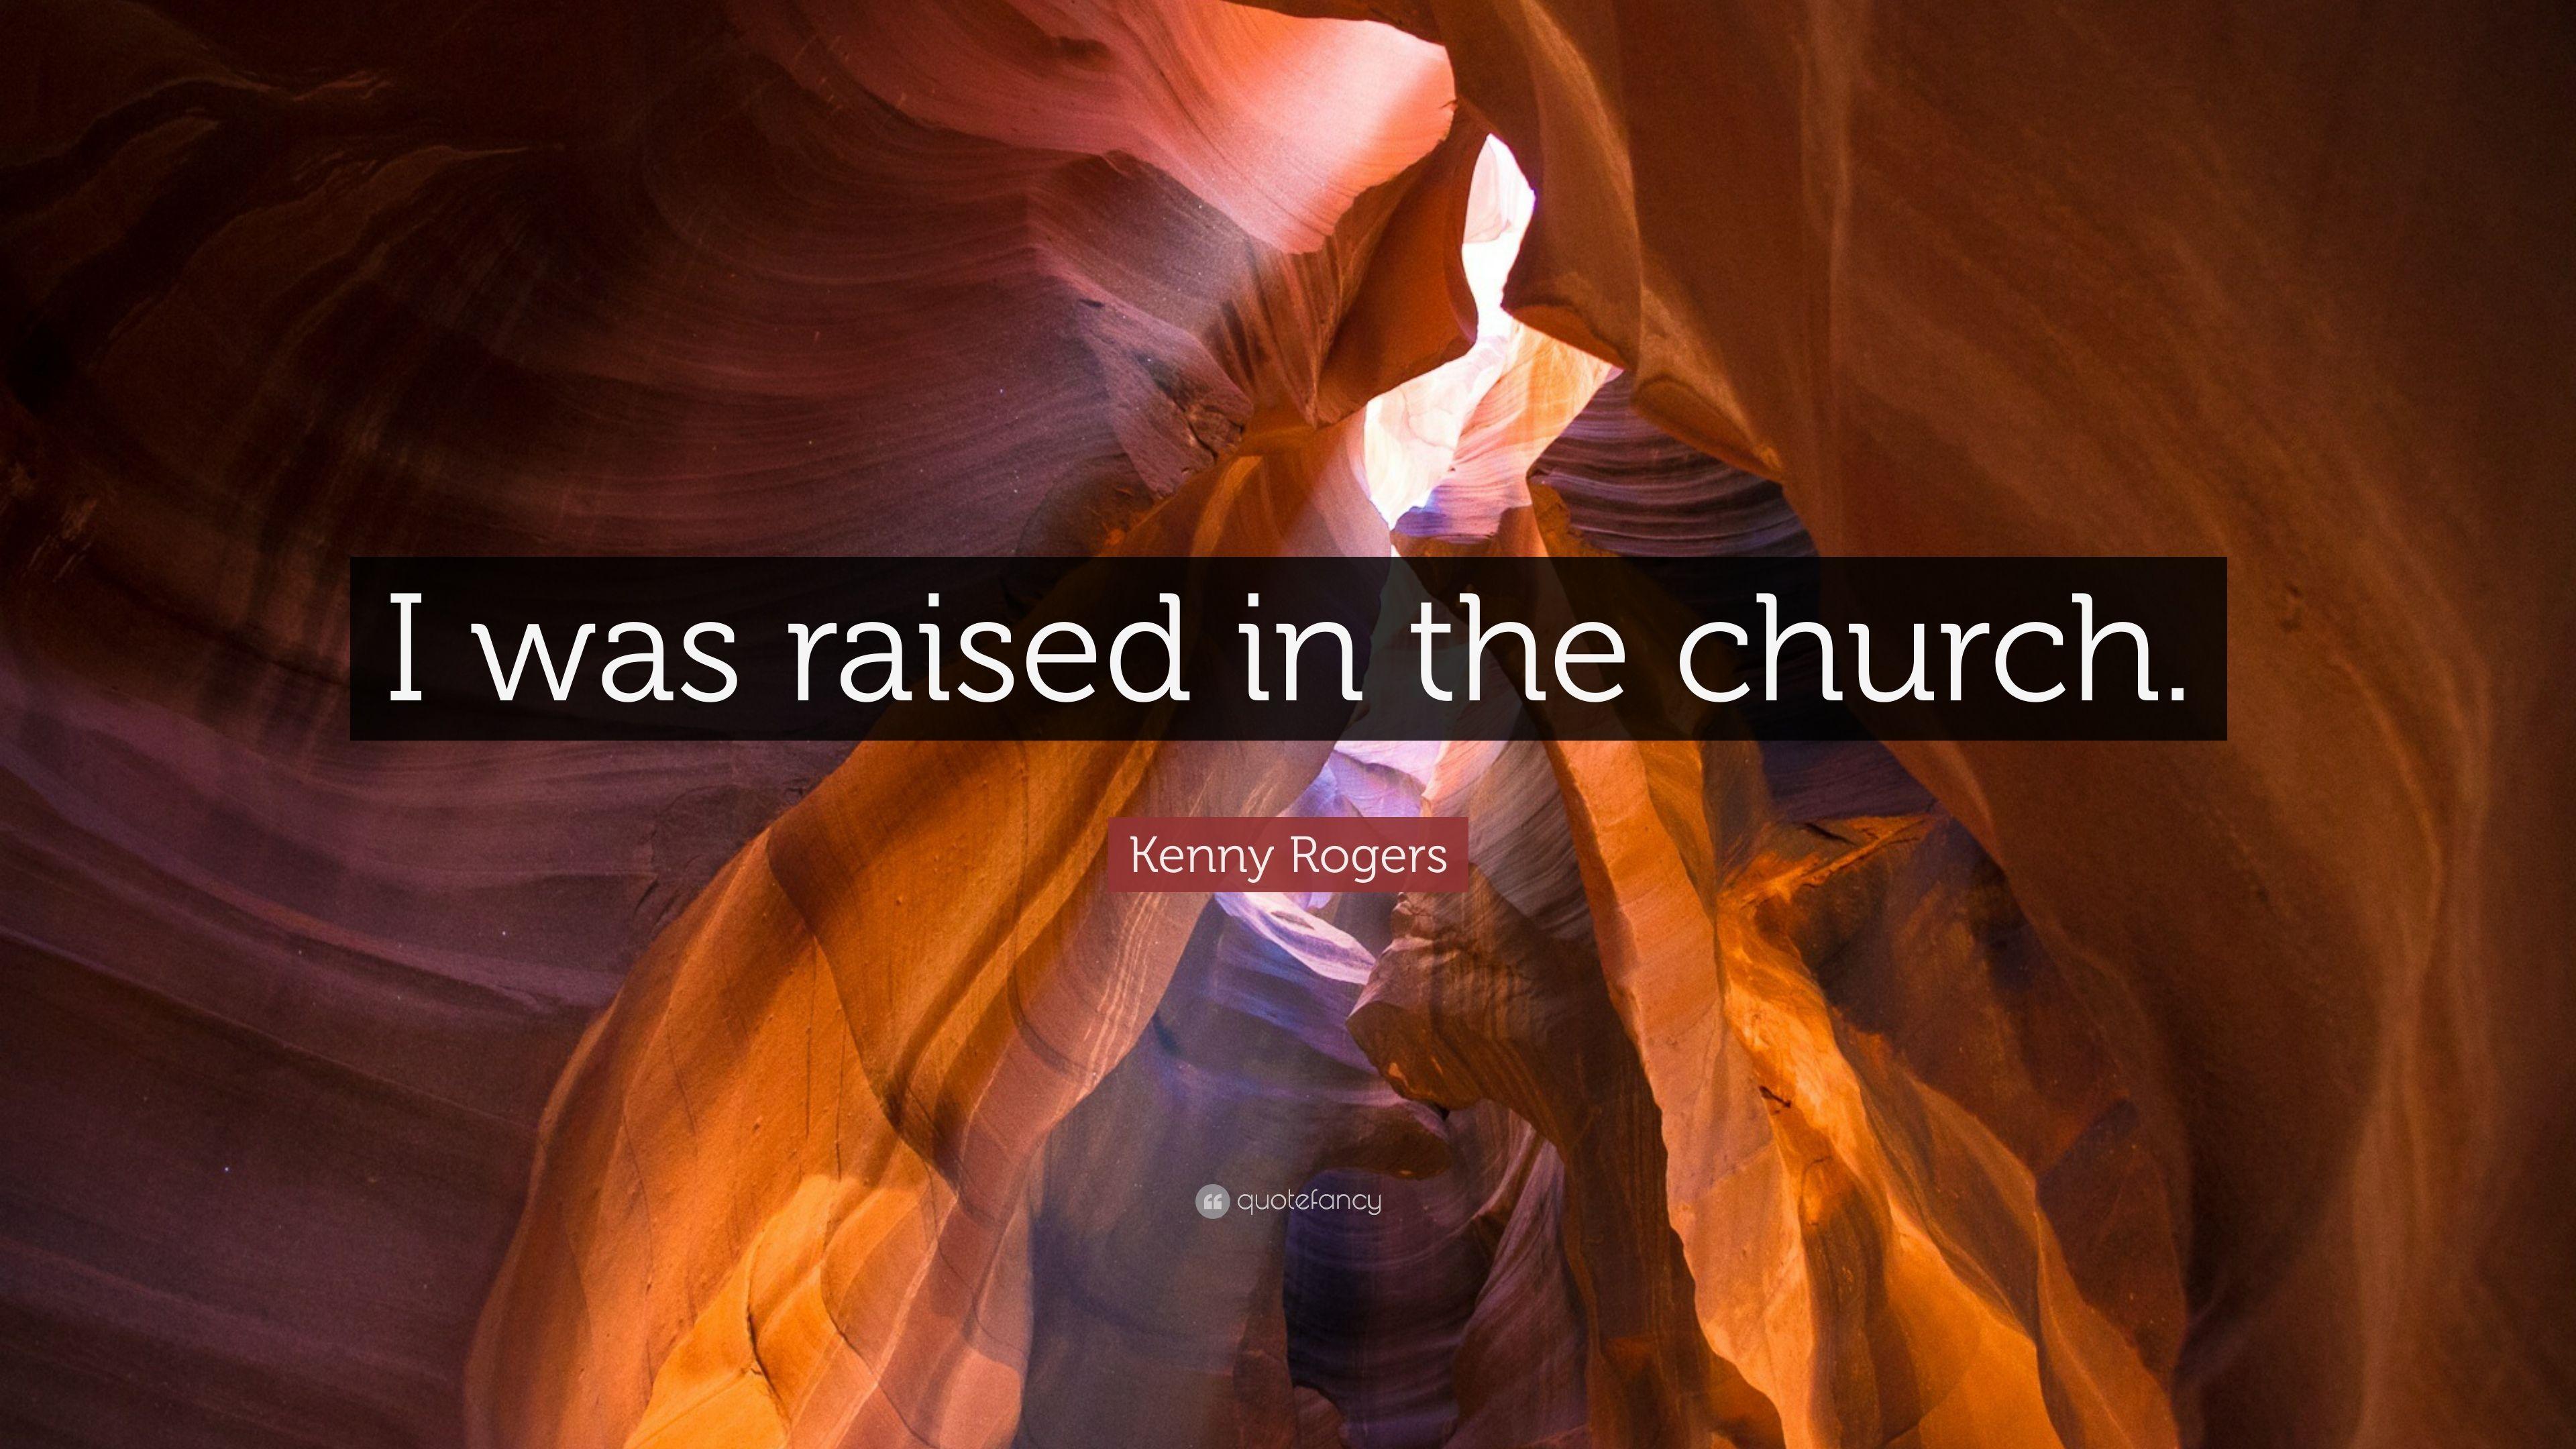 Kenny Rogers Quote: “I was raised in the church.” 9 wallpaper